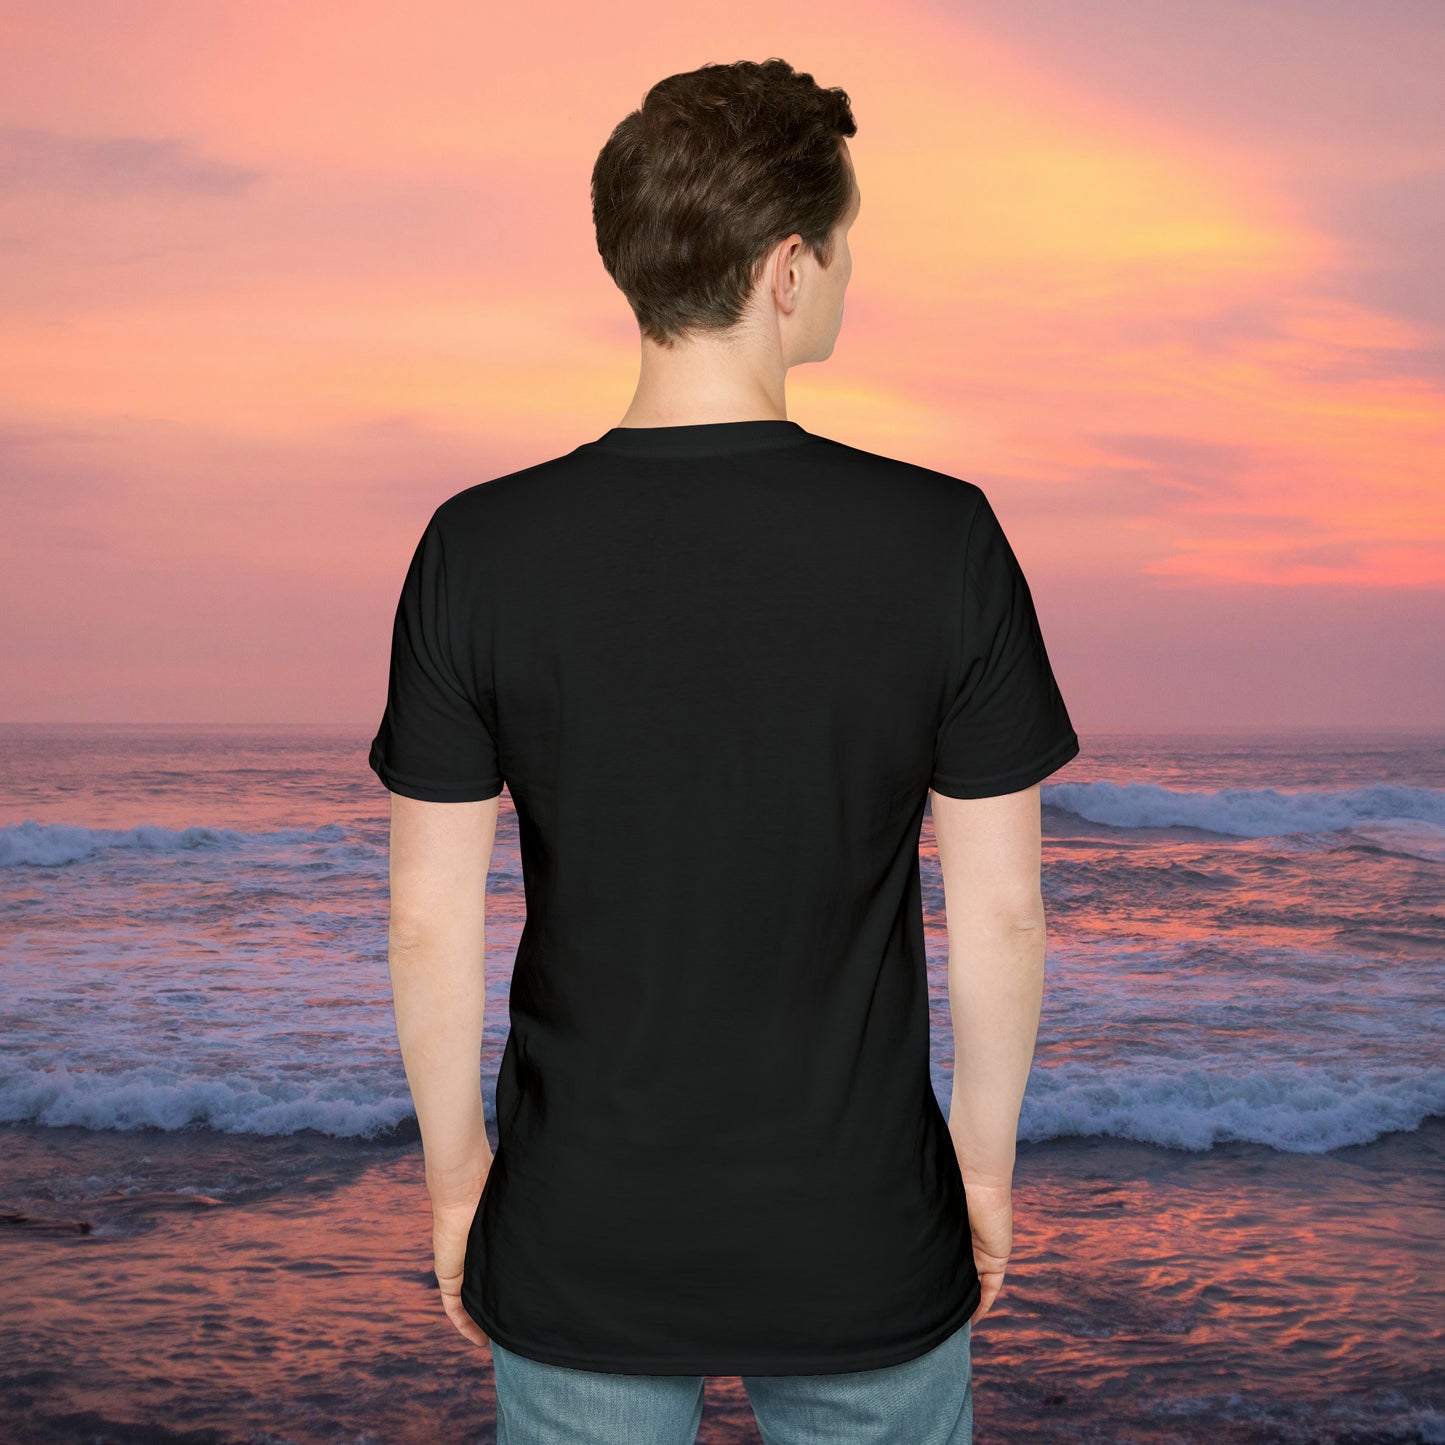 A grateful and sunny disposition Unisex Softstyle T-Shirt to brighten up your day!